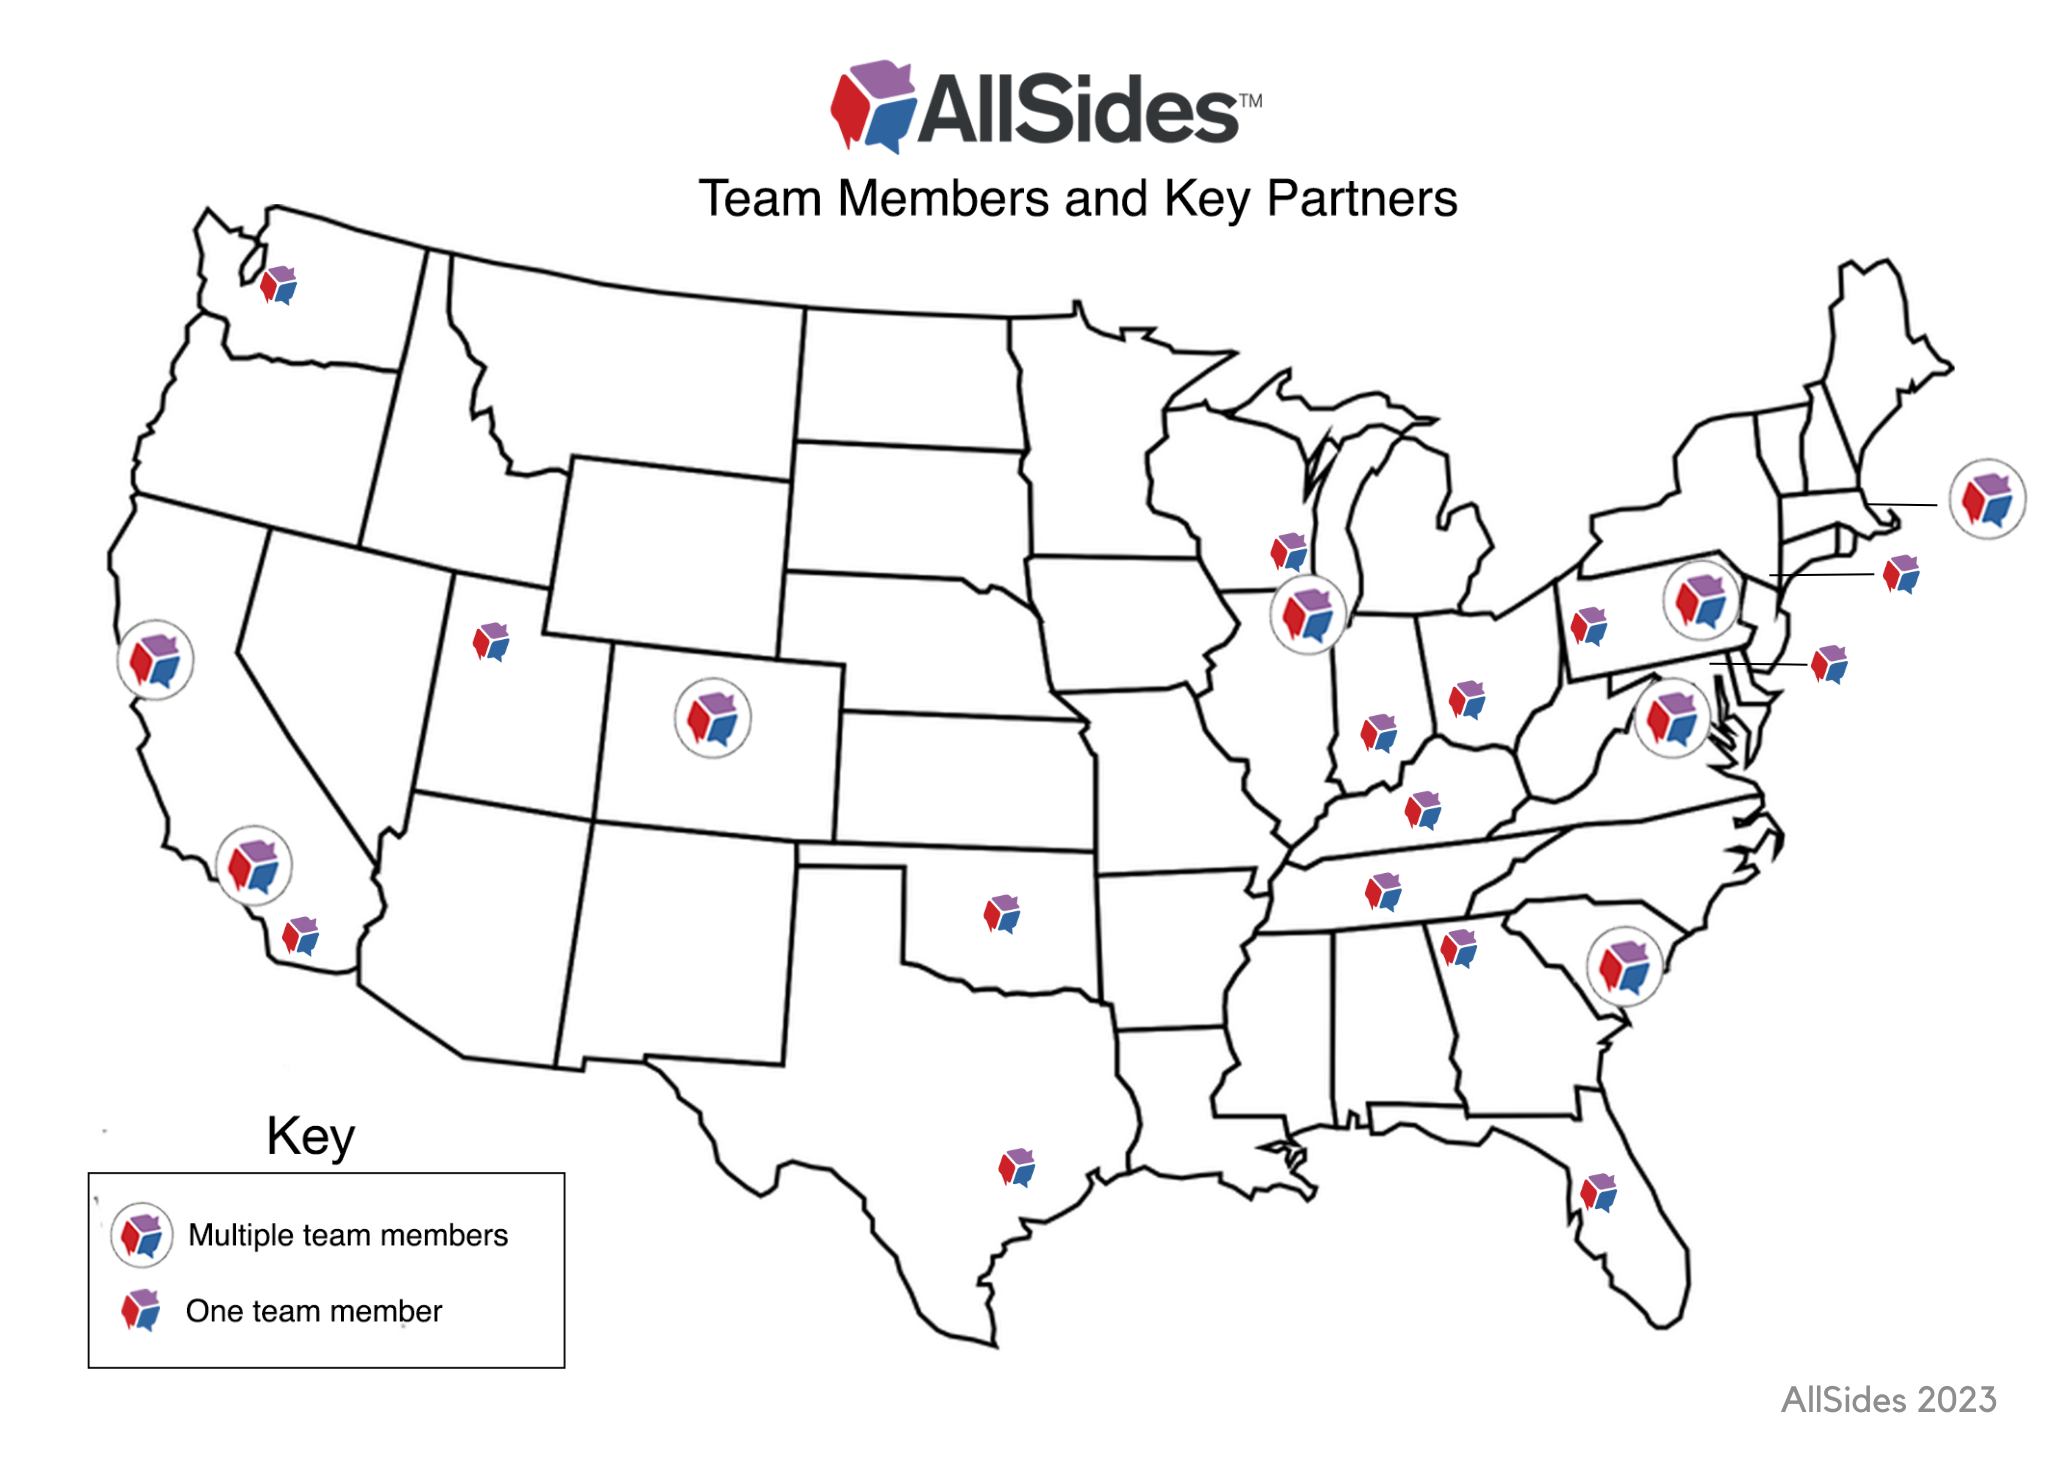 Map of the locations of AllSides Team Members and Key Partners across the United States